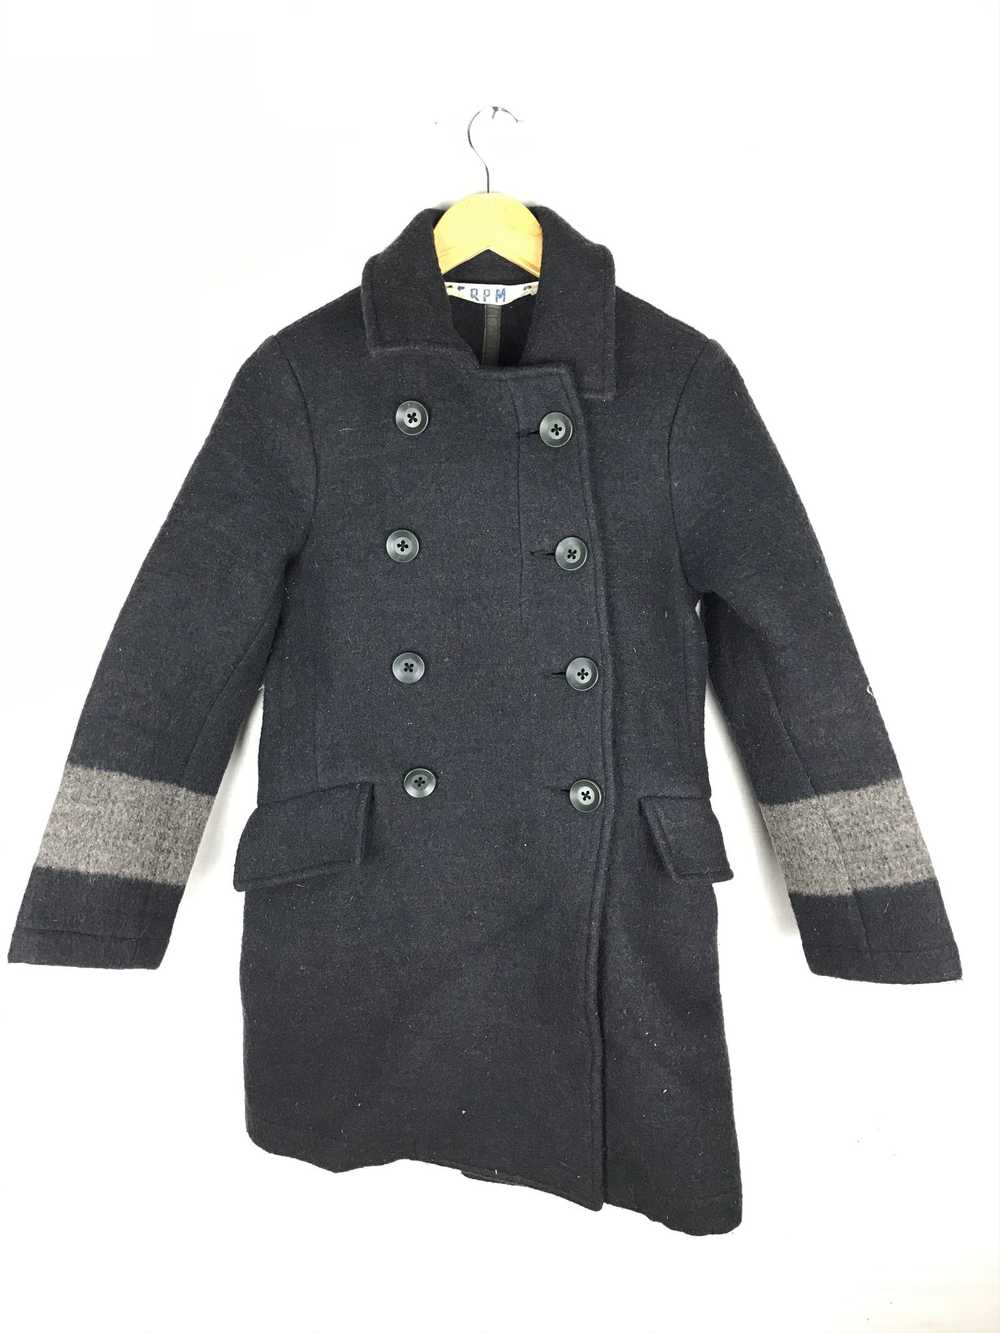 45rpm 45Rpm Wool Jacket, 100 % made in Japan - image 1